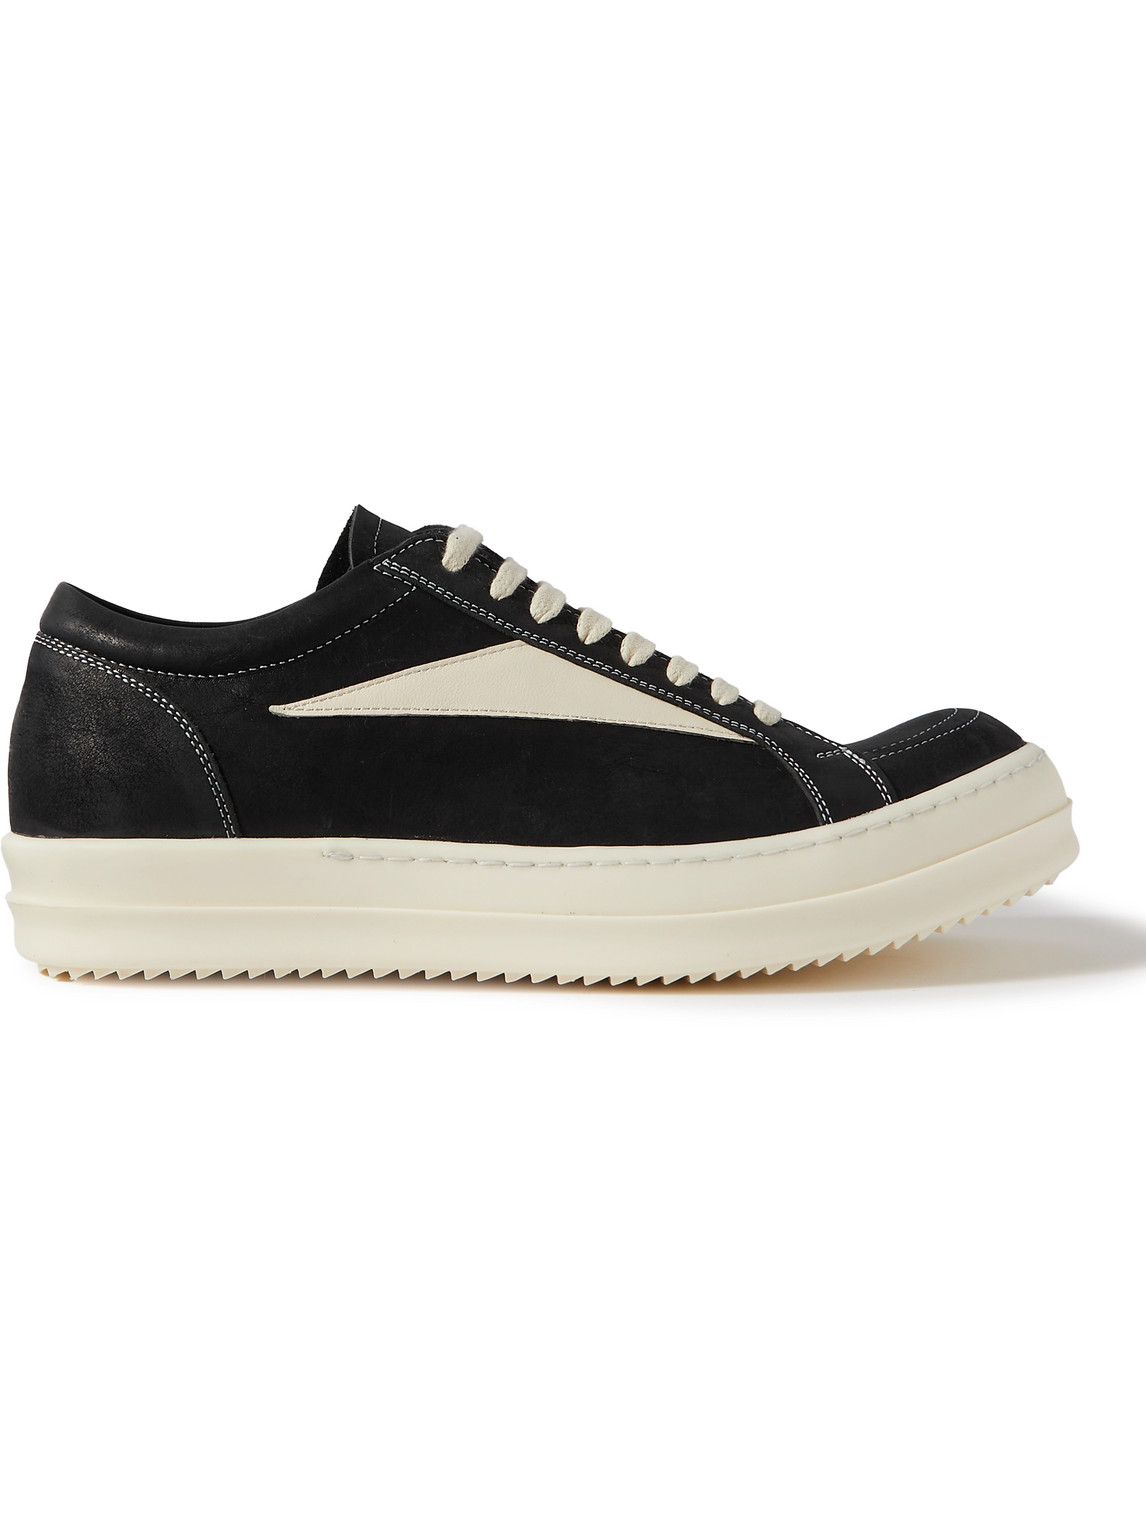 Rick Owens Vintage Leather Trainers In Black